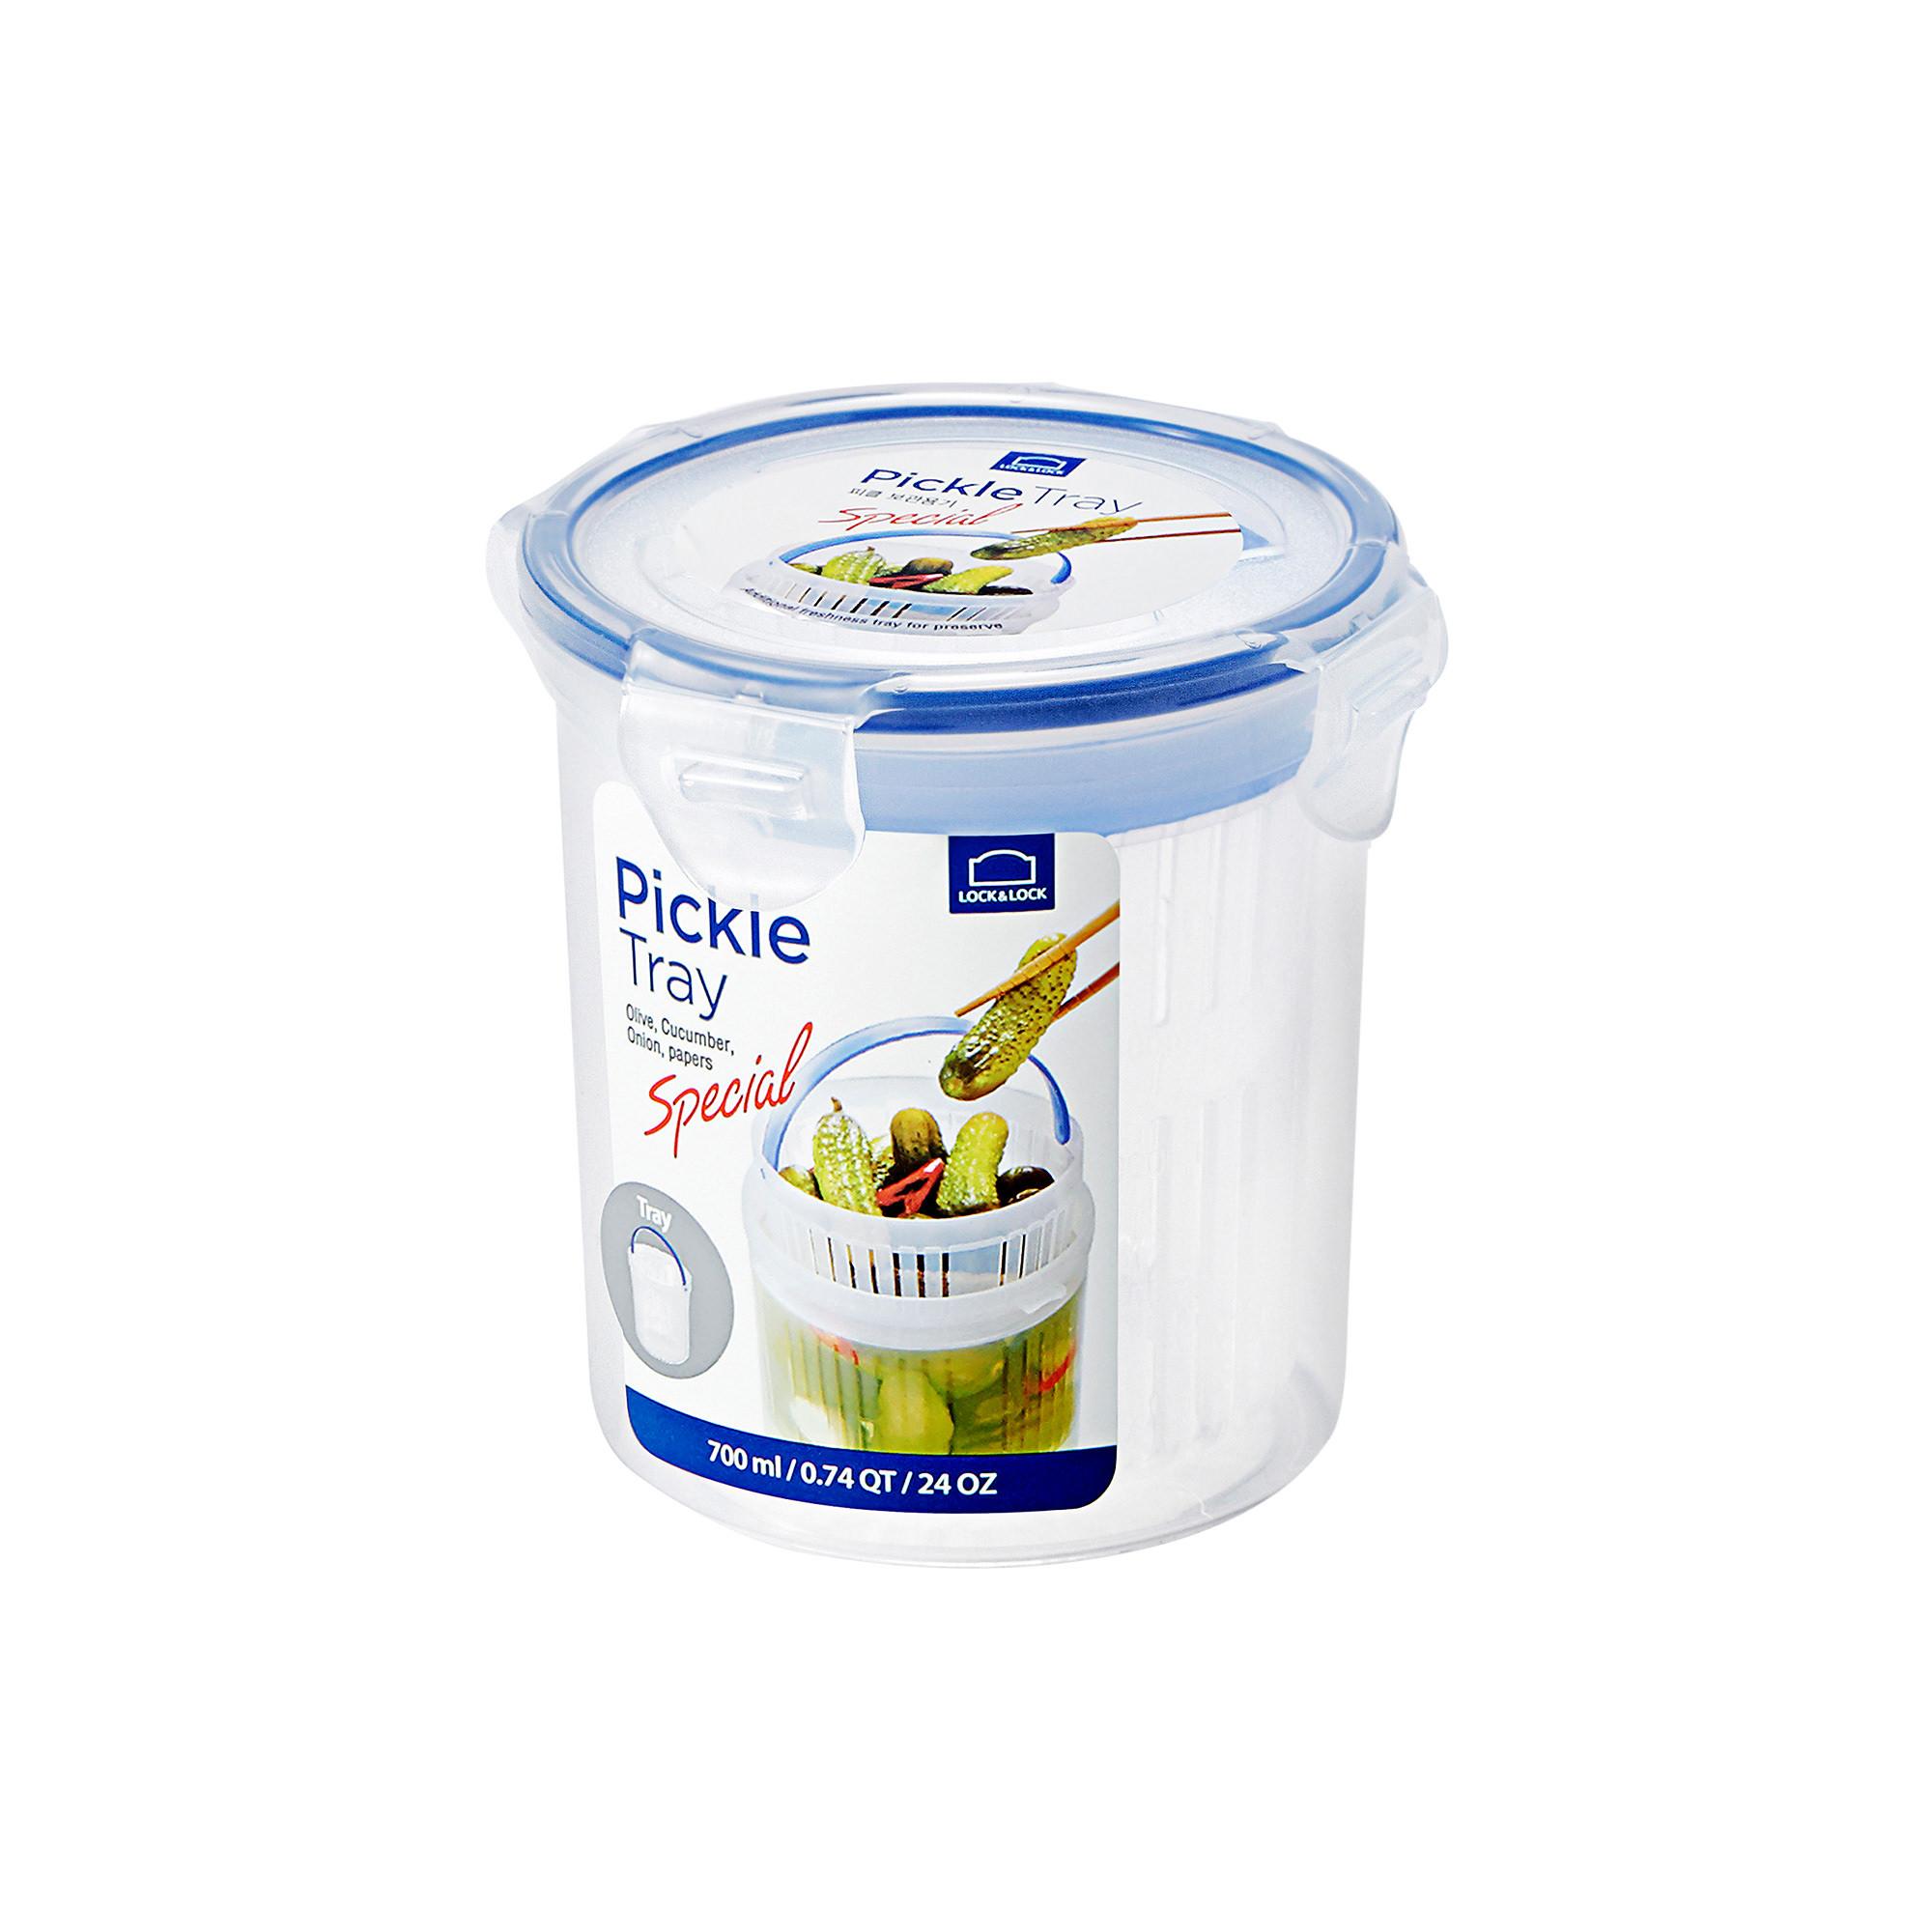 Lock & Lock Special Round Container with Draining Basket 700ml Image 1